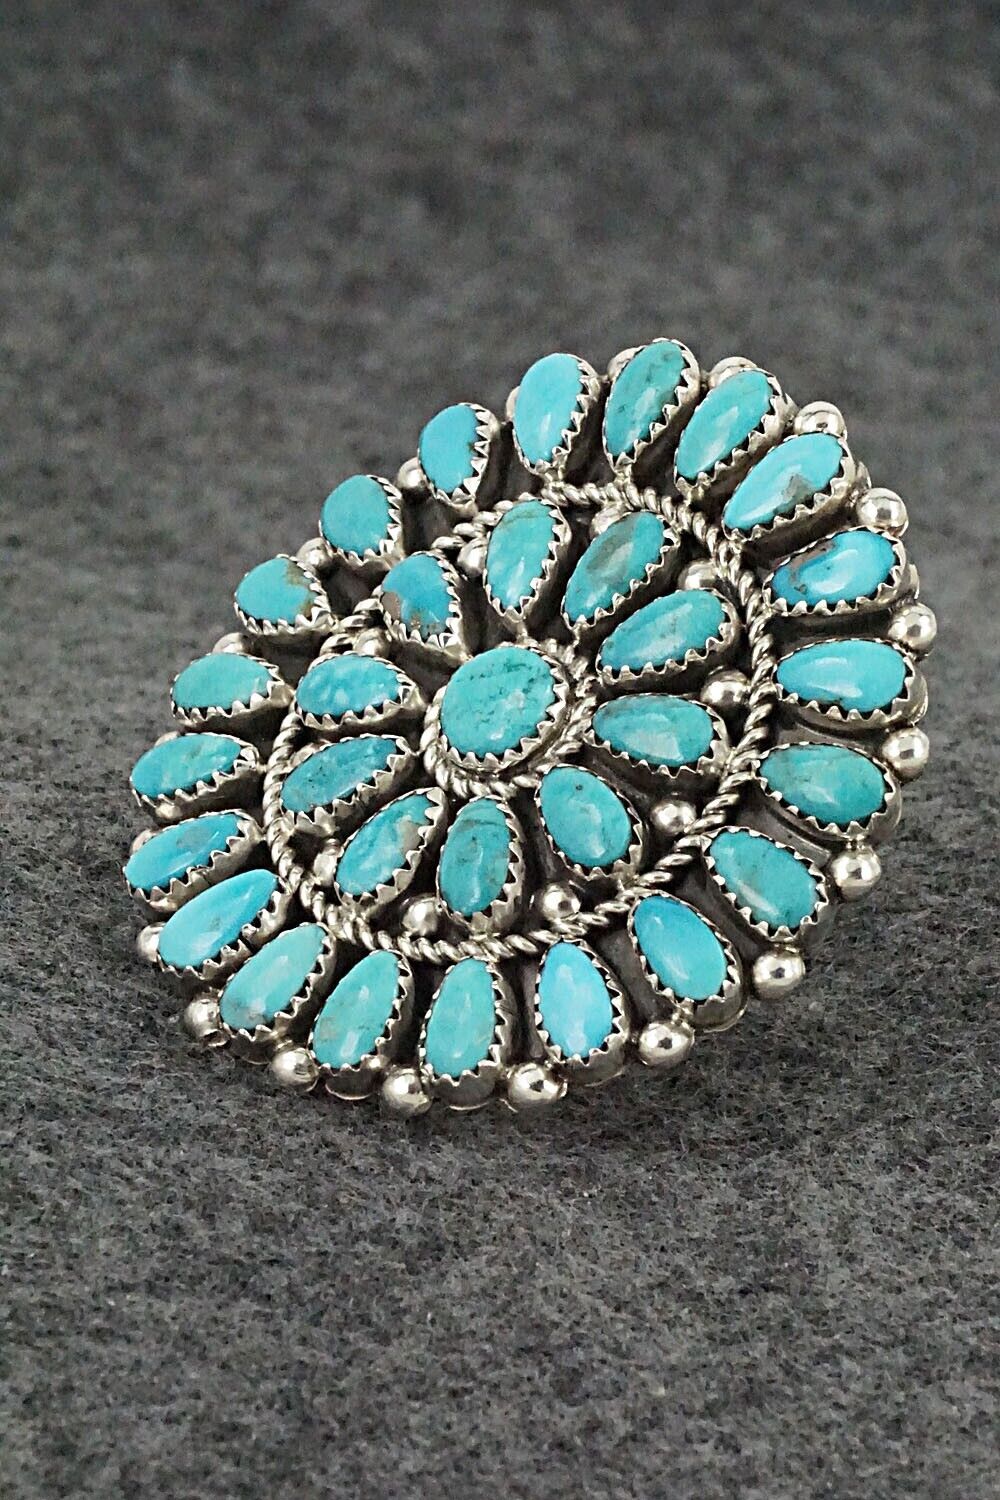 Turquoise & Sterling Silver Ring - Rodney Notah - Size 7.75